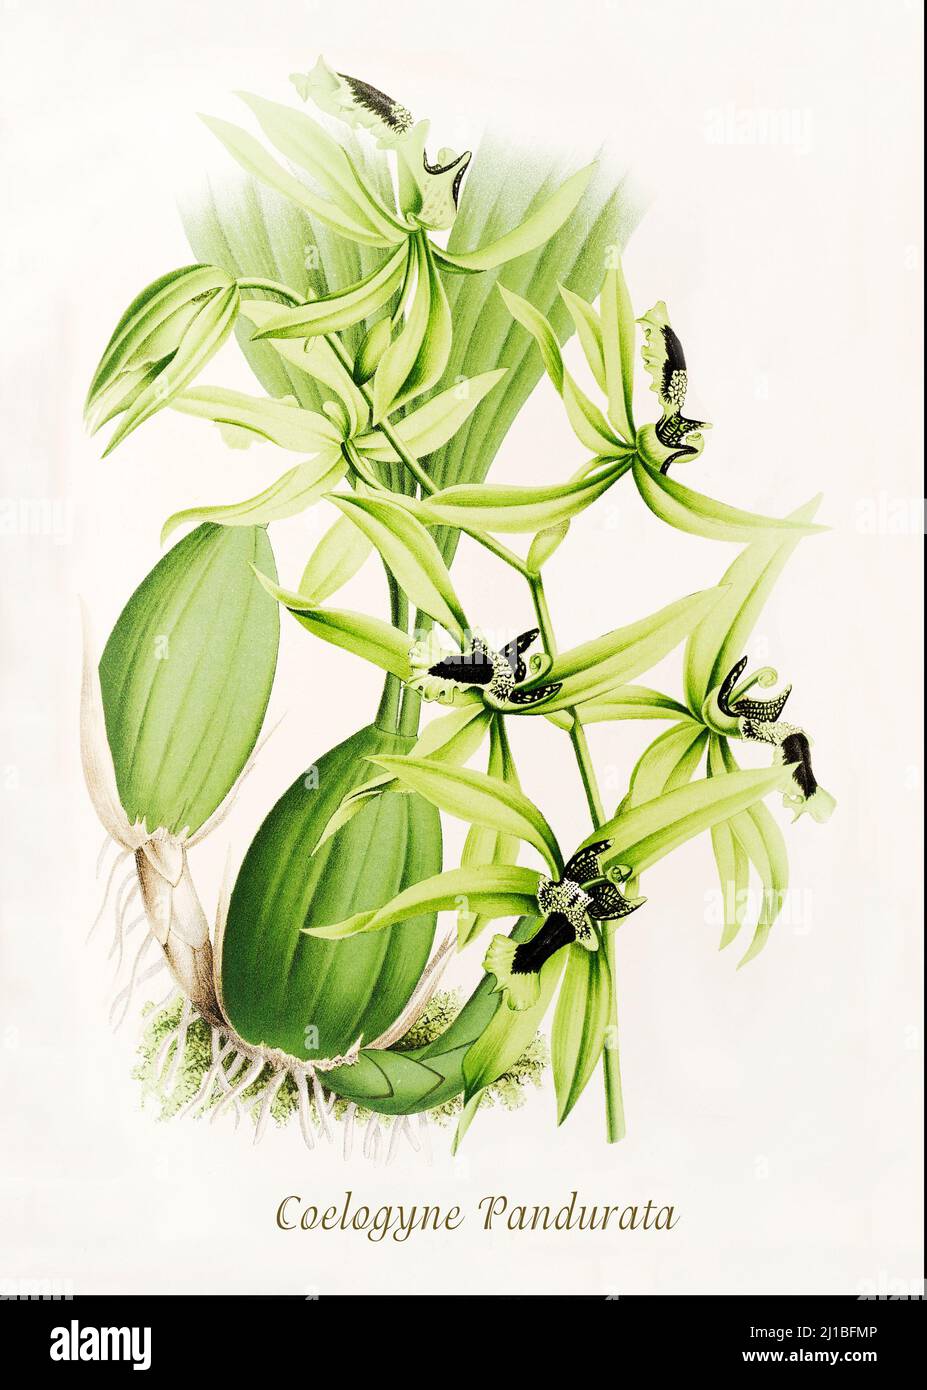 A late 18th century illustration of Coelogyne pandurata, a species of orchid in the Family Orchidaceae, native to Malaysia, Sumatra, Borneo and the Philippines as a large sized, hot growing epiphyte found on large trees near rivers. From Iconographie des Orchidees, a magazine of botanical illustrations published by Jean Jules Linden (1817-1898) was a Belgian botanist, explorer and horticulturist who specialised in orchids. Stock Photo